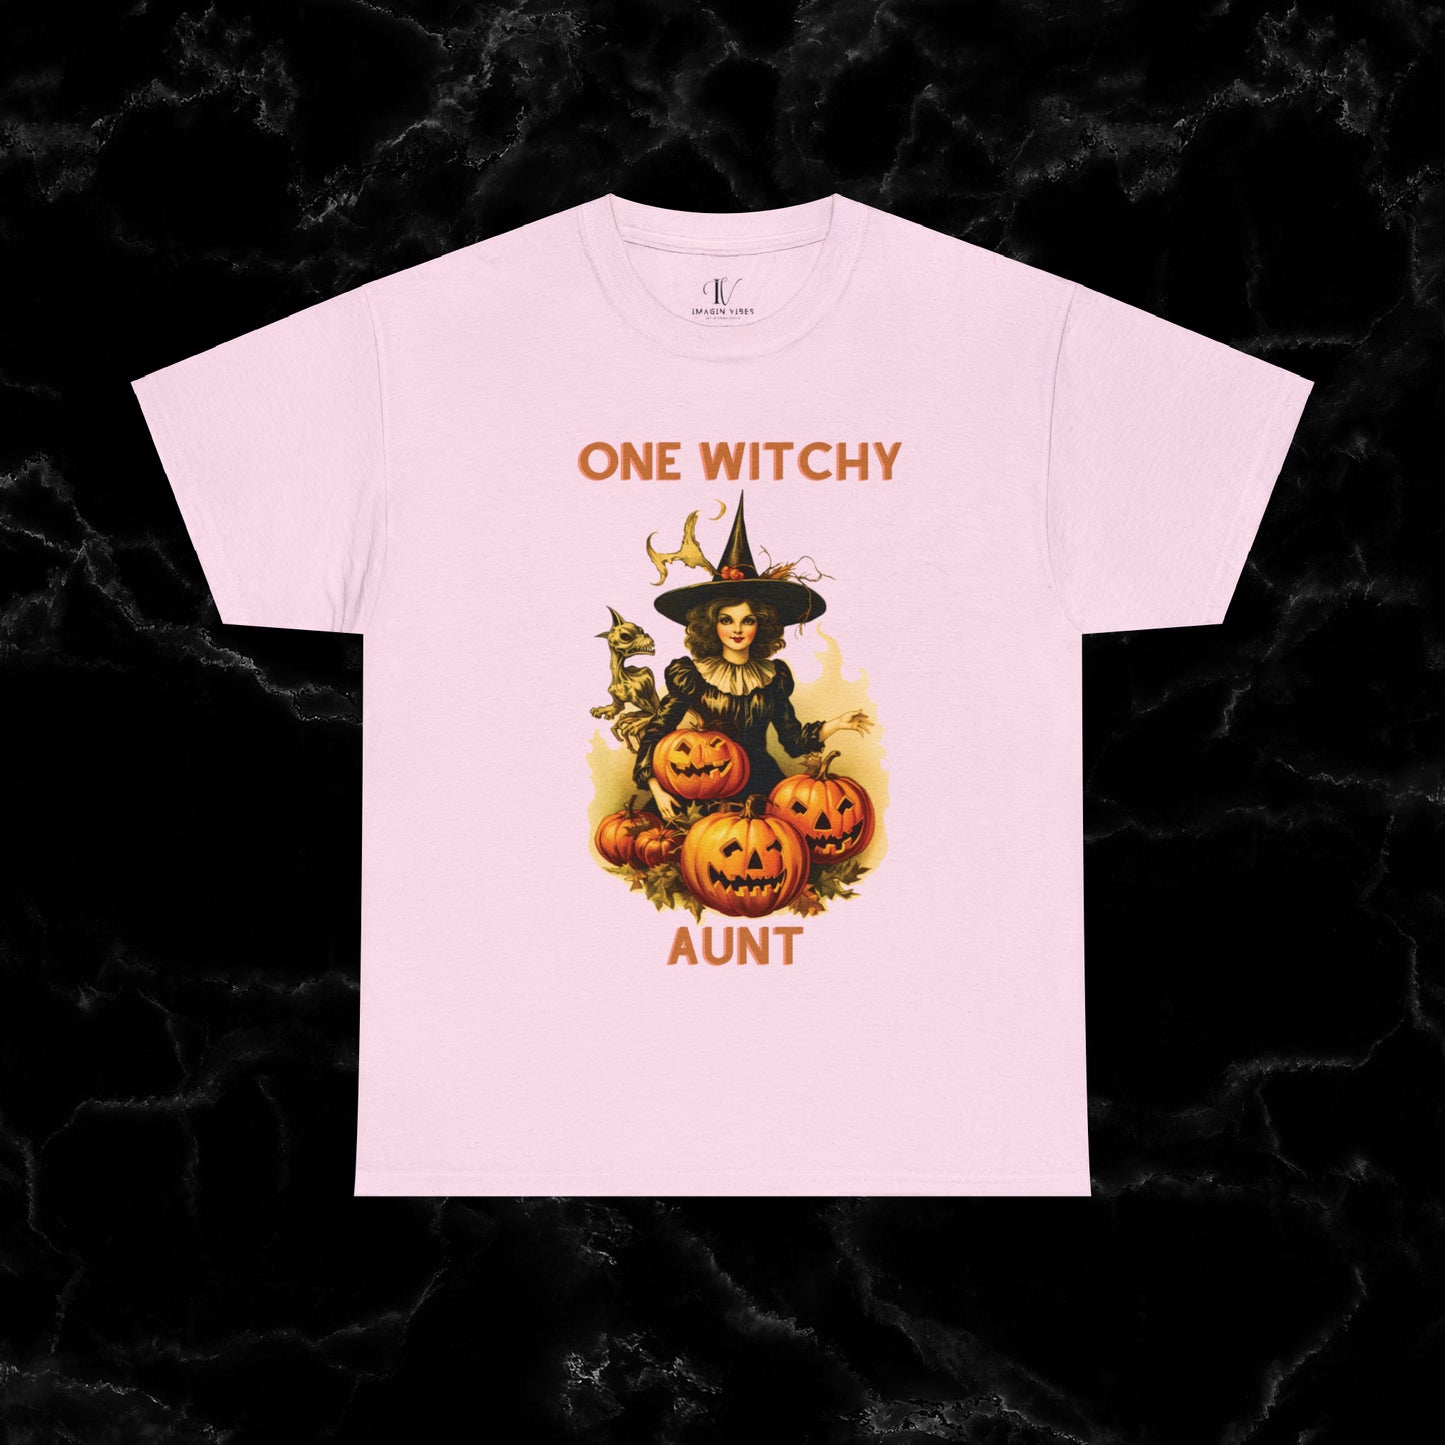 One Witchy Auntie Cotton T-Shirt - Cool Aunt, Aunt Halloween, Perfect Gift for Aunts T-Shirt Light Pink S 